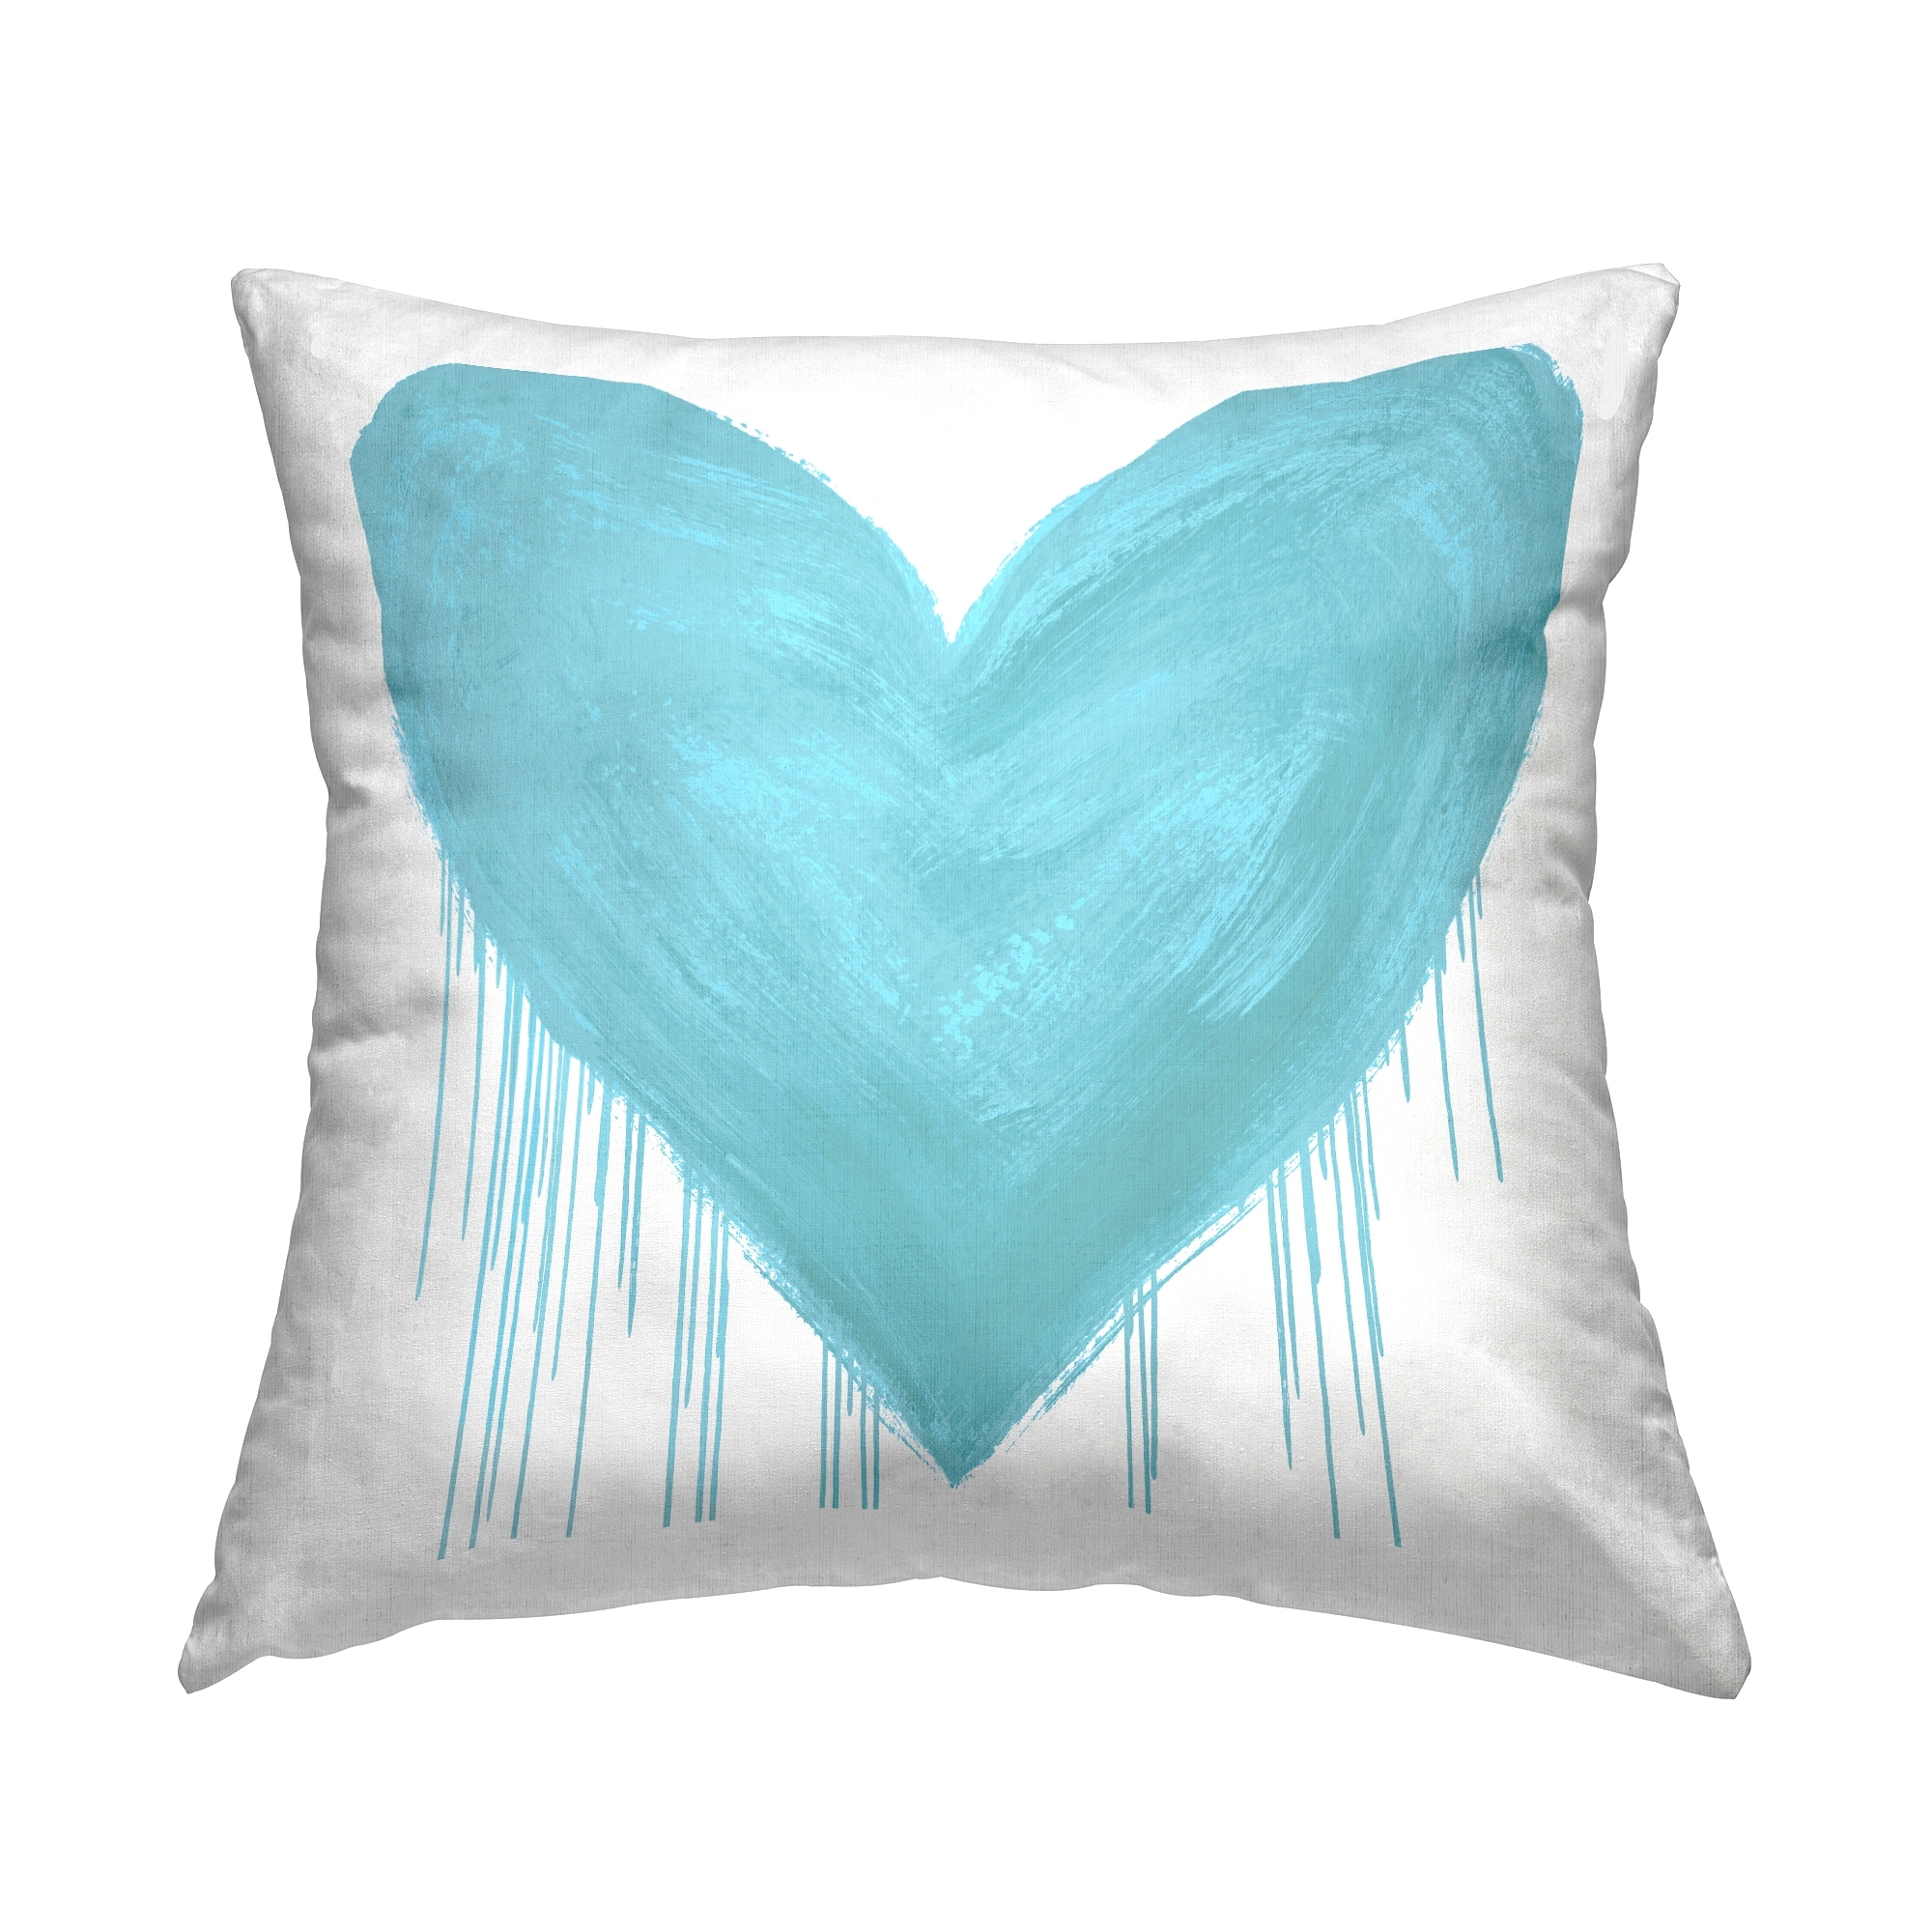 Stupell Industries Blue Heart Dripping Shape Printed Throw Pillow Design by  Lindsay Rodgers - On Sale - Bed Bath & Beyond - 37371401